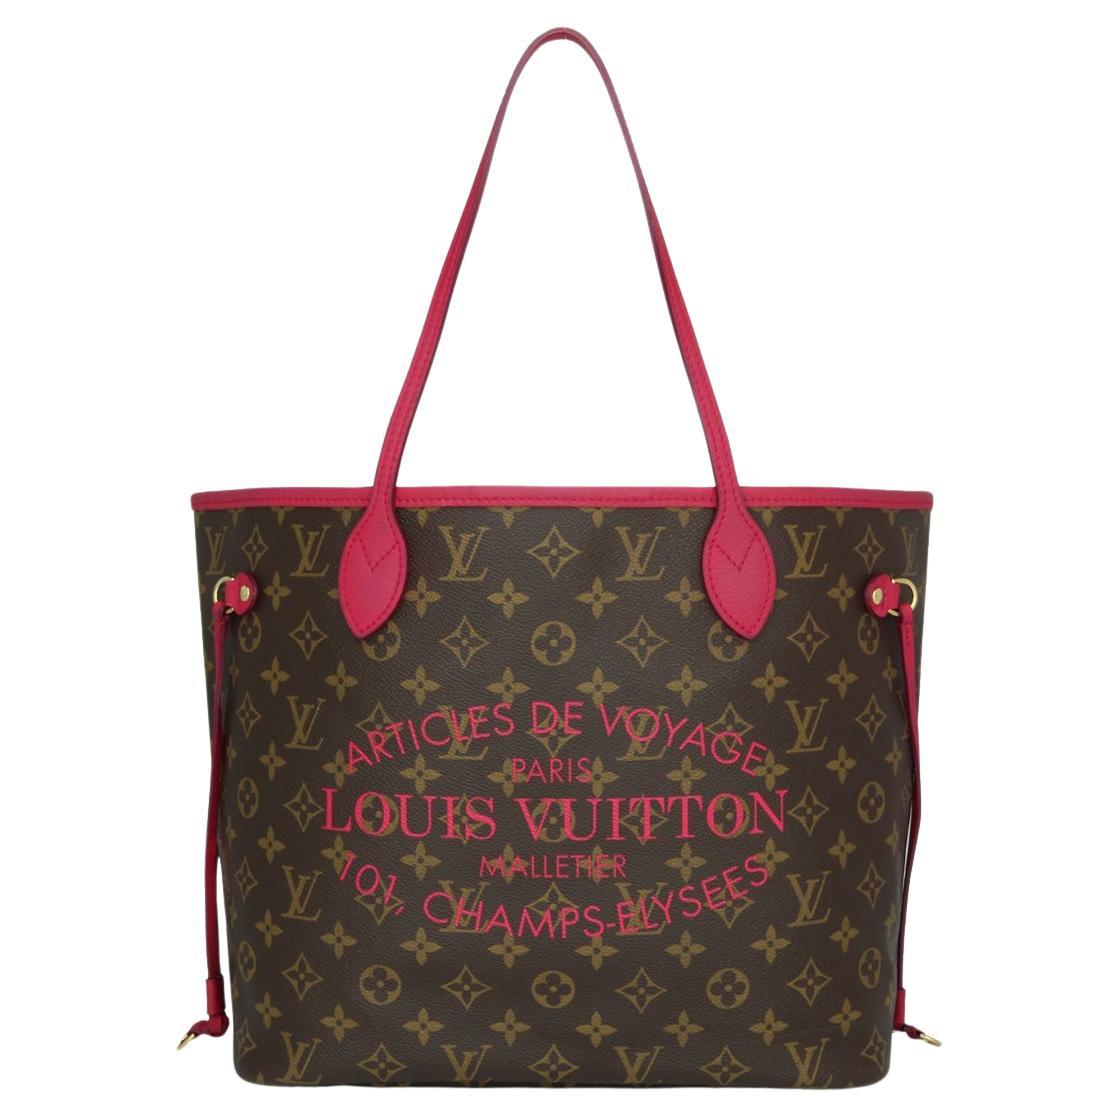 Louis Vuitton Neverfull MM Ikat Bag in Monogram Fuchsia 2013 Limited Edition For Sale